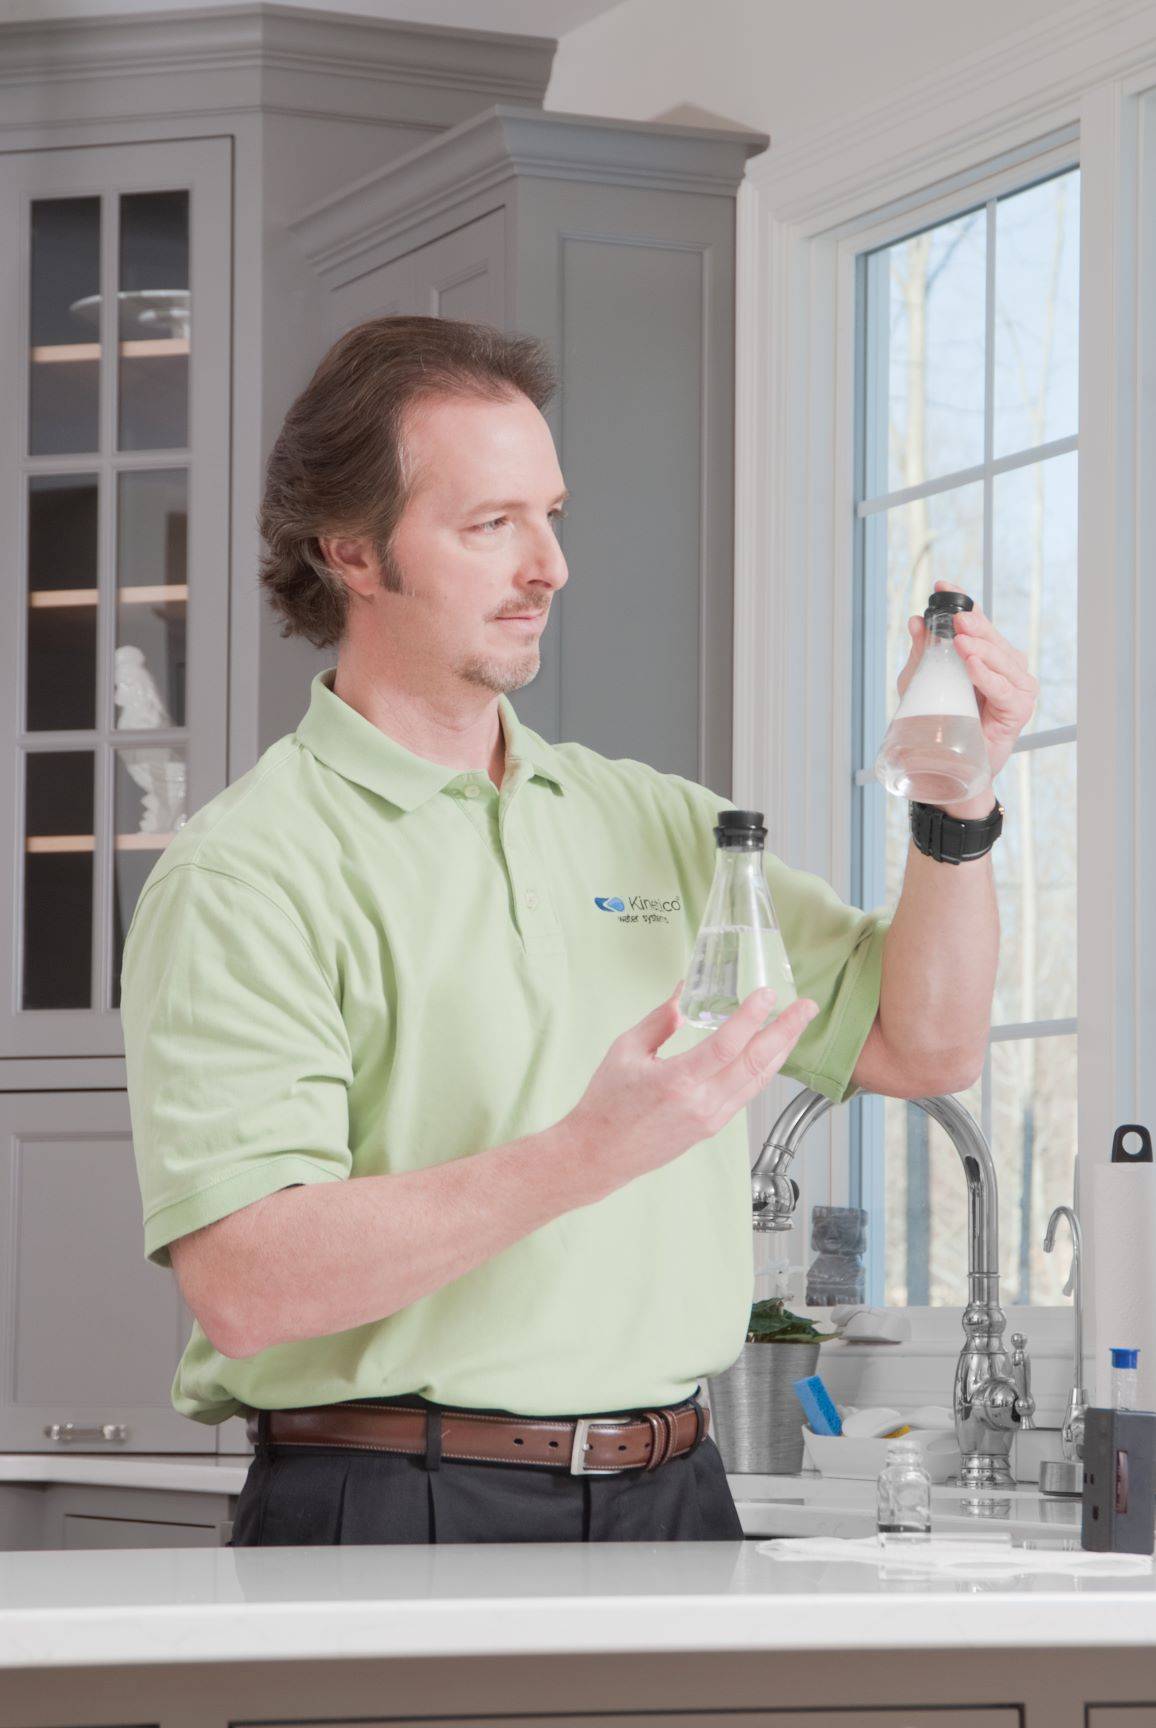 Kinetico Sales Professional Testing Water Samples in Kitchen HR